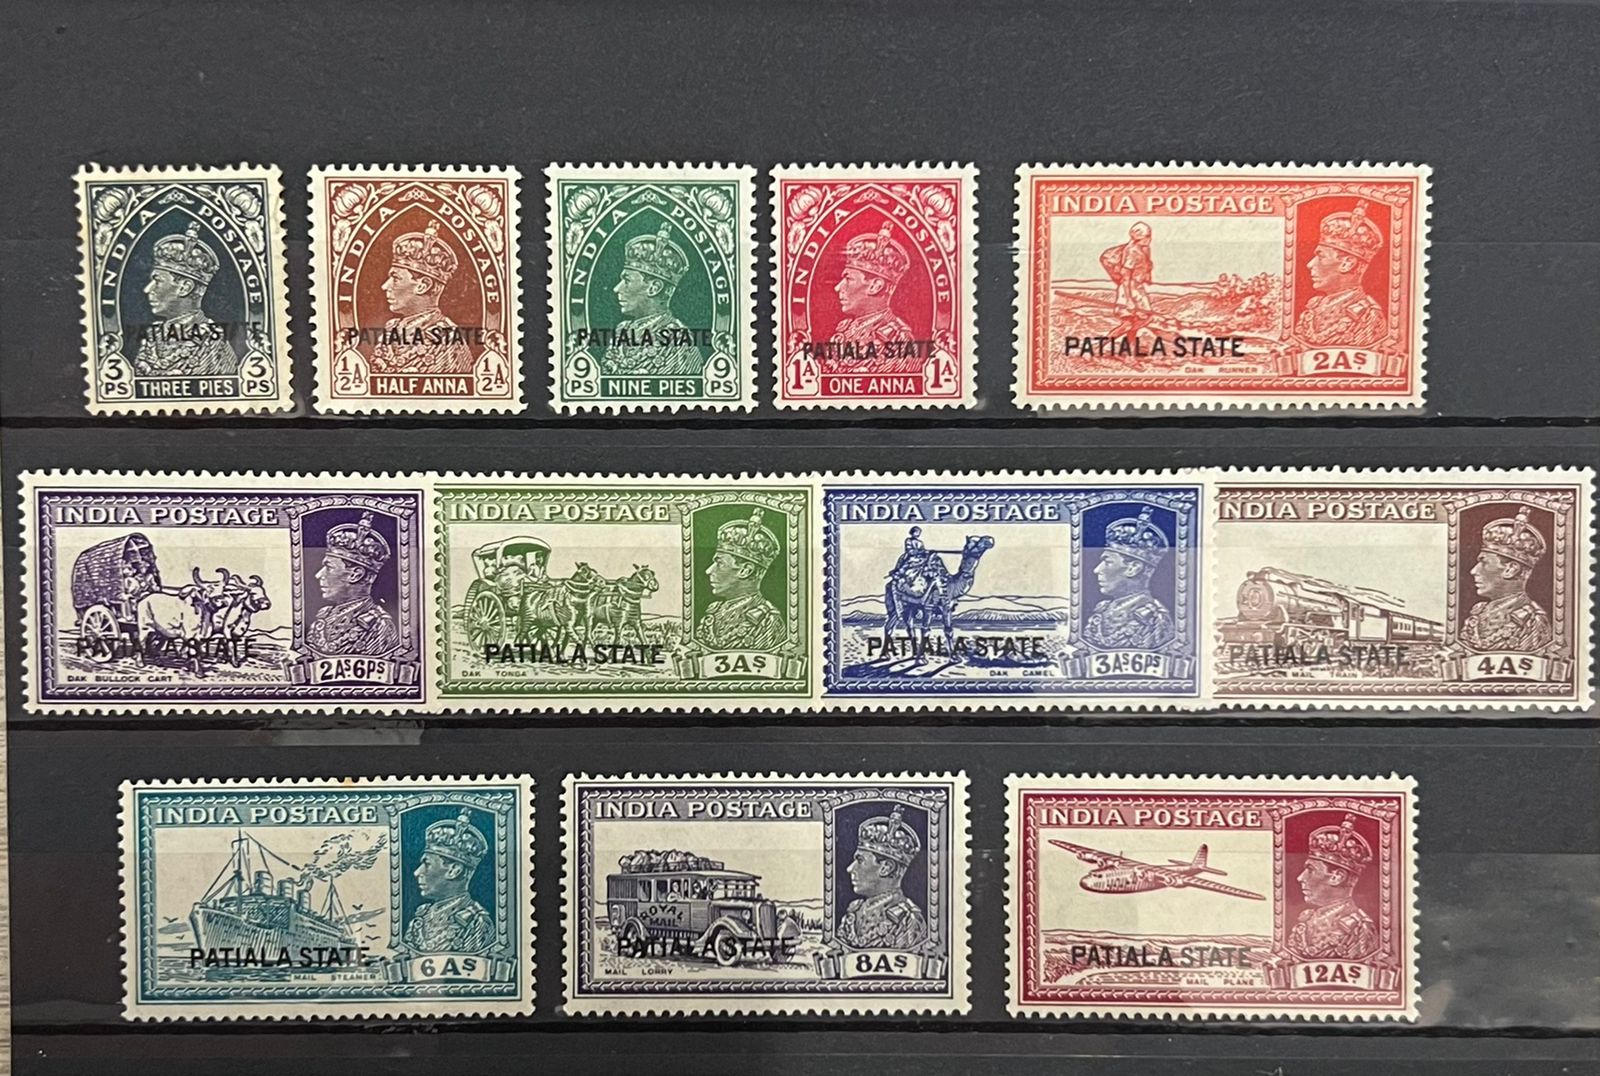 India Patiala State 1937 KGVI Complete Set to 12as Transport Series Mint SG Val £250